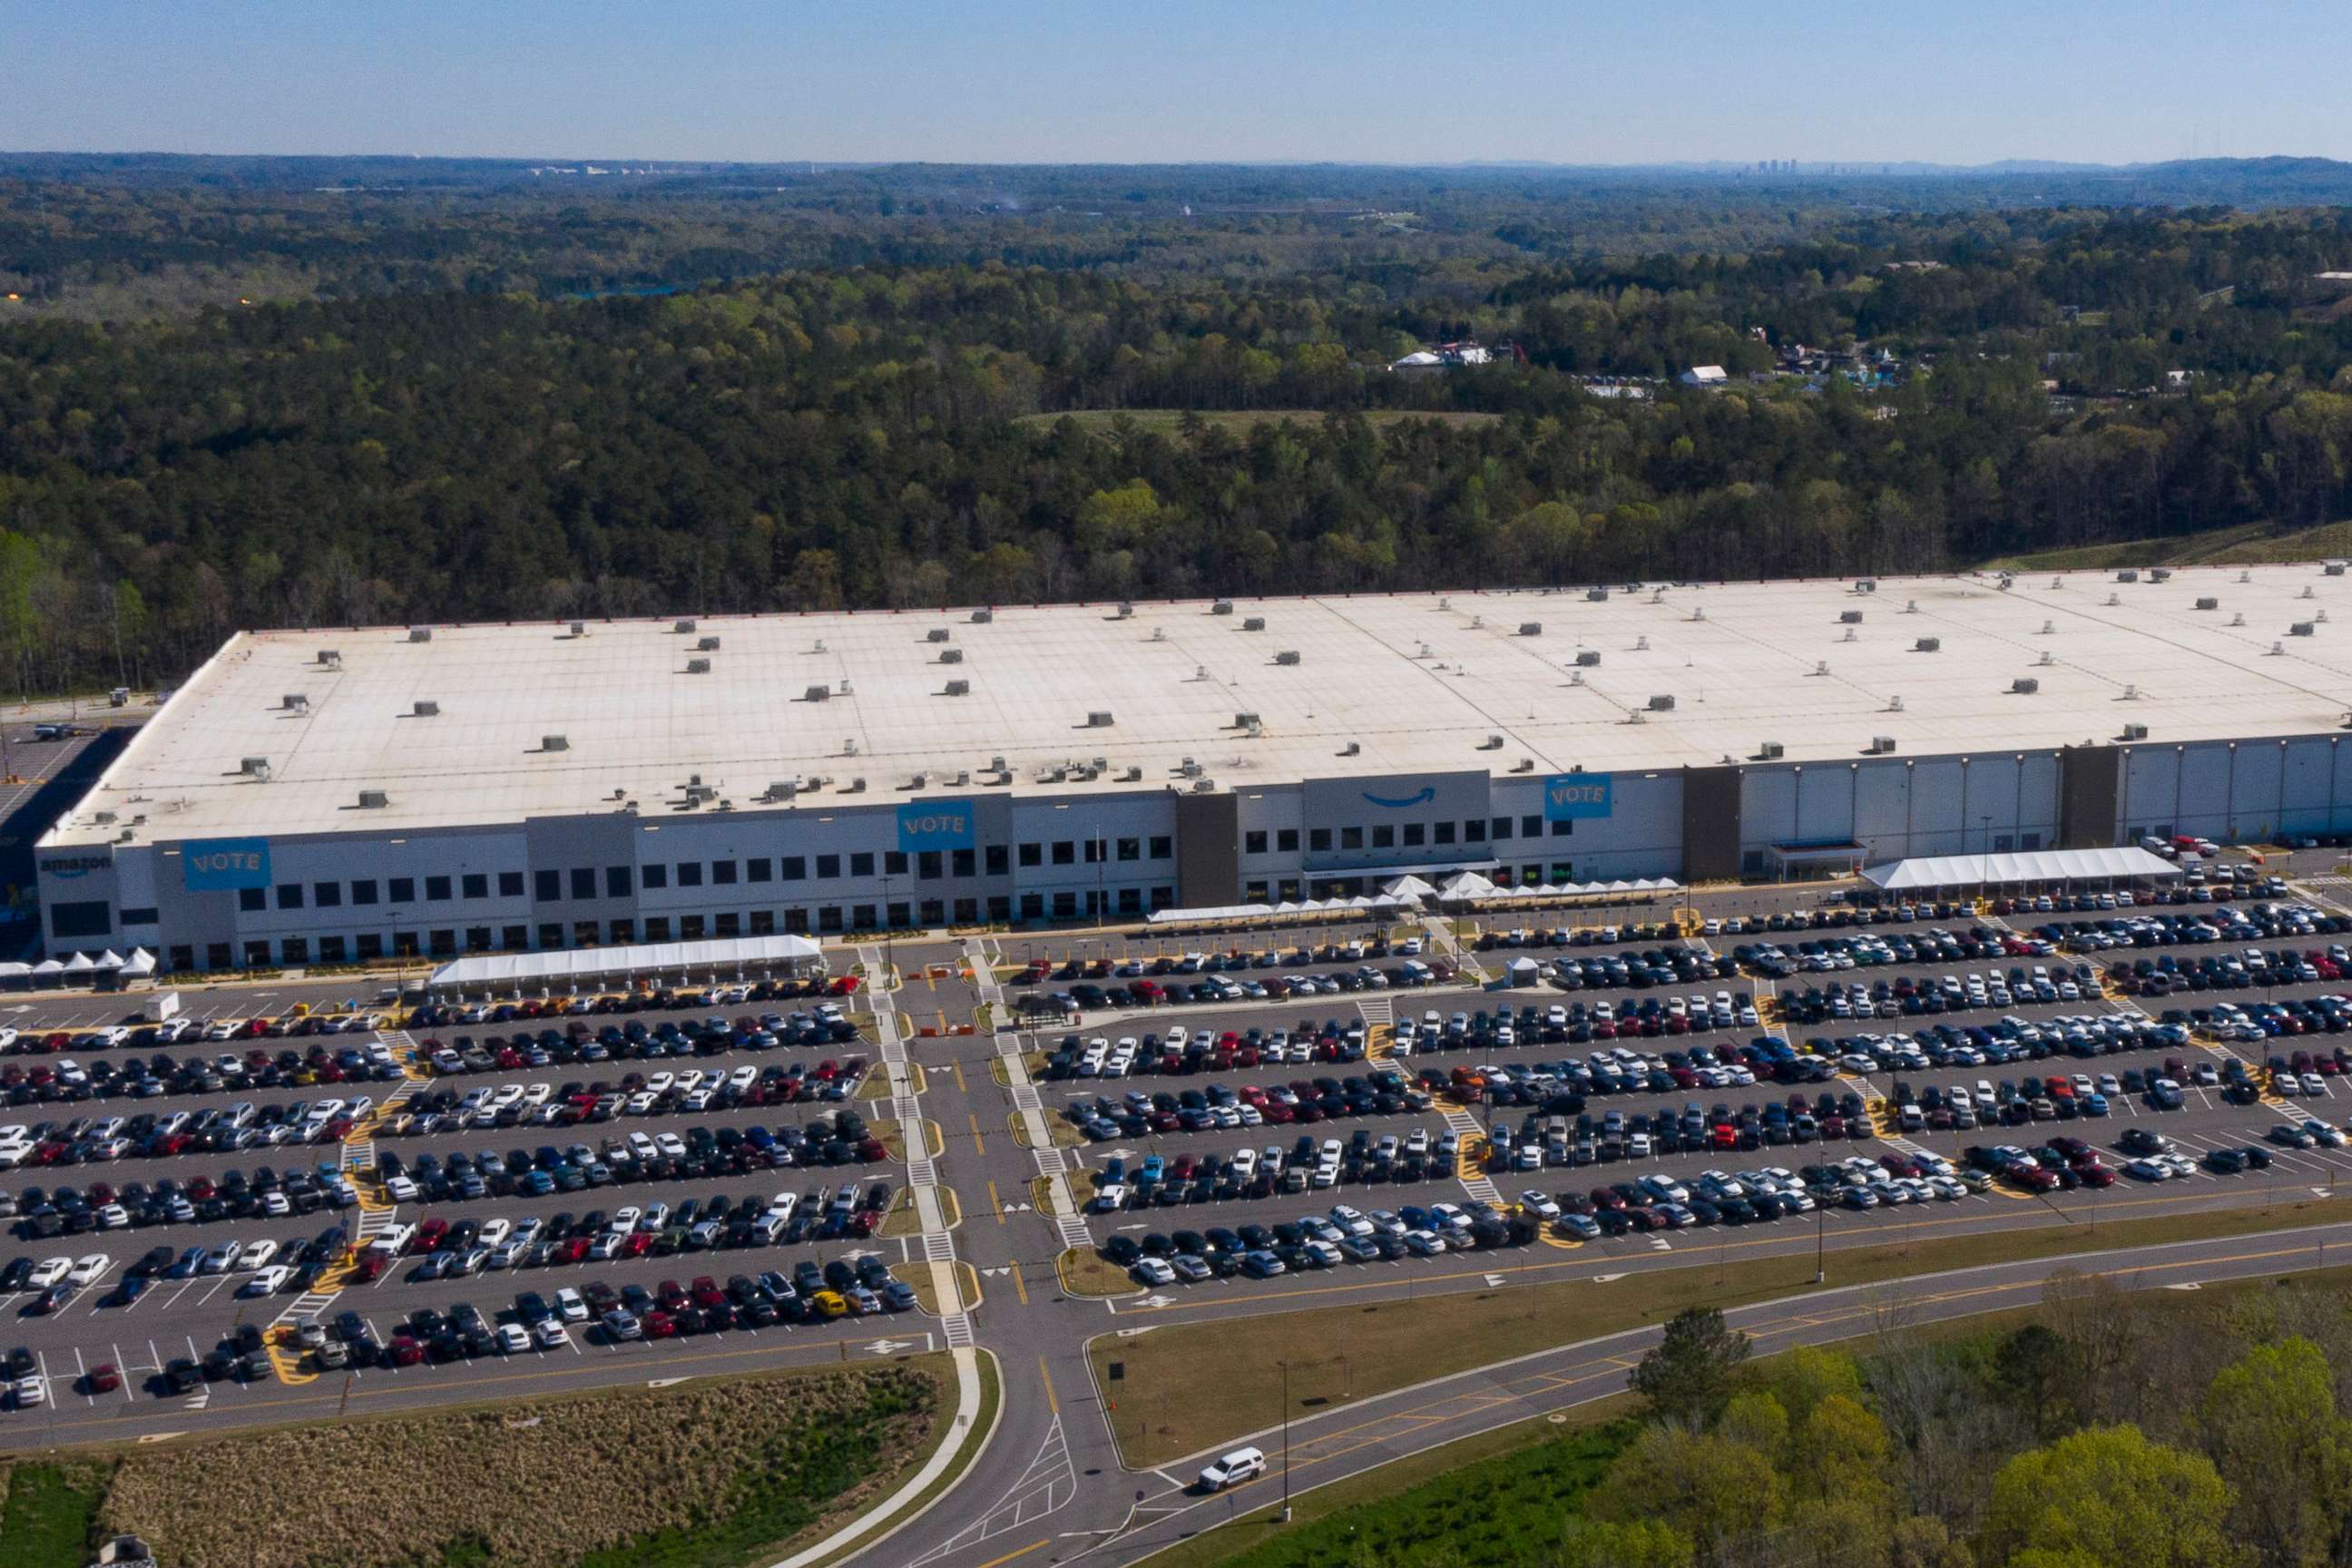 PHOTO: An aerial image shows the Amazon.com, Inc. BHM1 fulfillment center in Bessemer, Ala., on March 29, 2021.